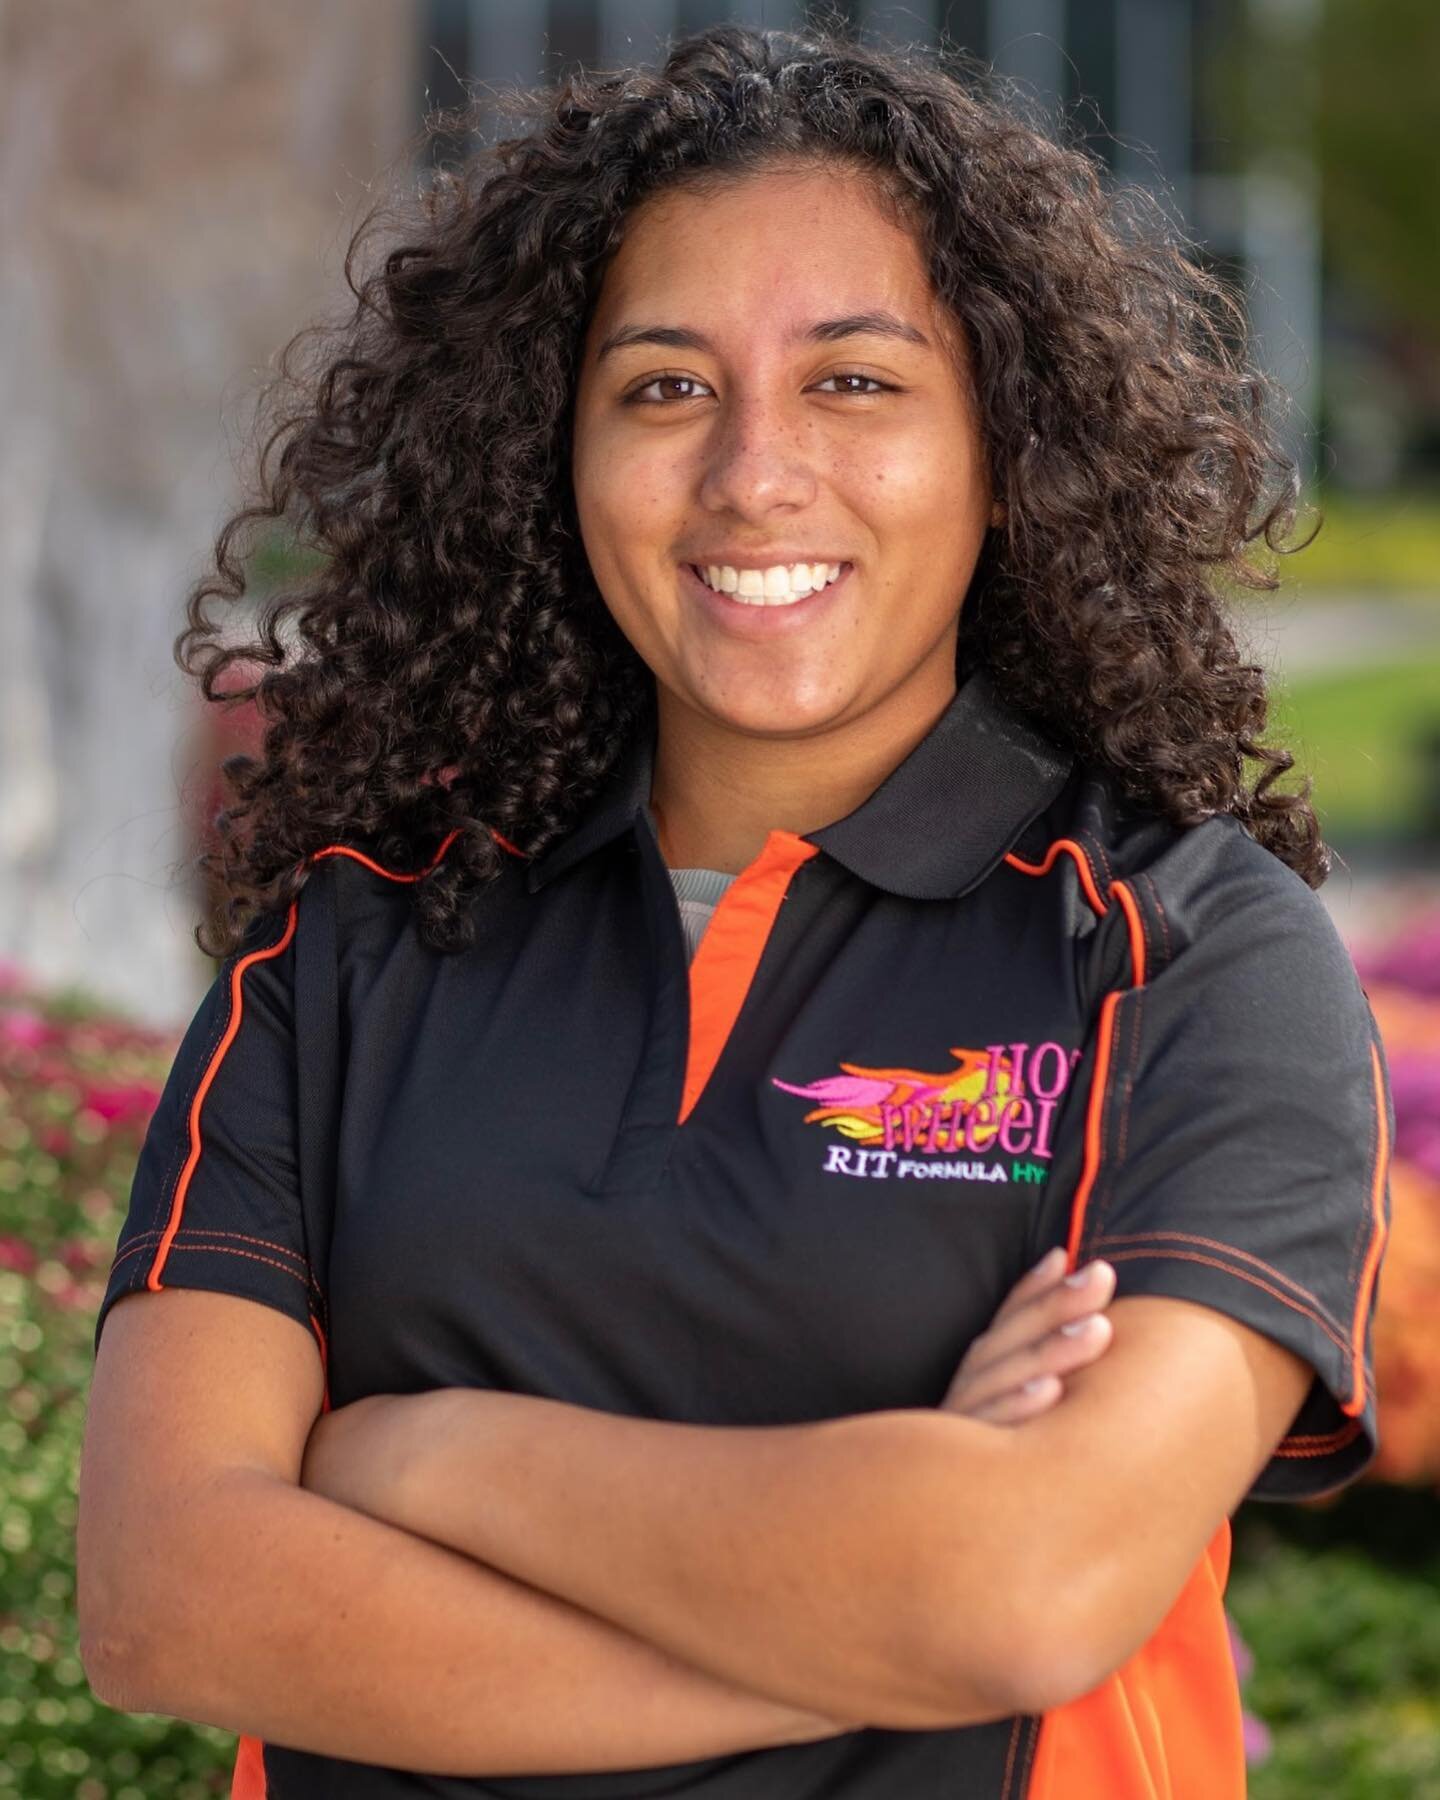 🎉Kicking off the school year with our 2022-2023 lead spotlights! 
Introducing one of our Driver Interface Leads: Amarisse Rodriguez !

📒Year and Major?
2nd year Mechanical Engineering ⚙️
 
🤩What are you most excited for this season?
Putting the ca